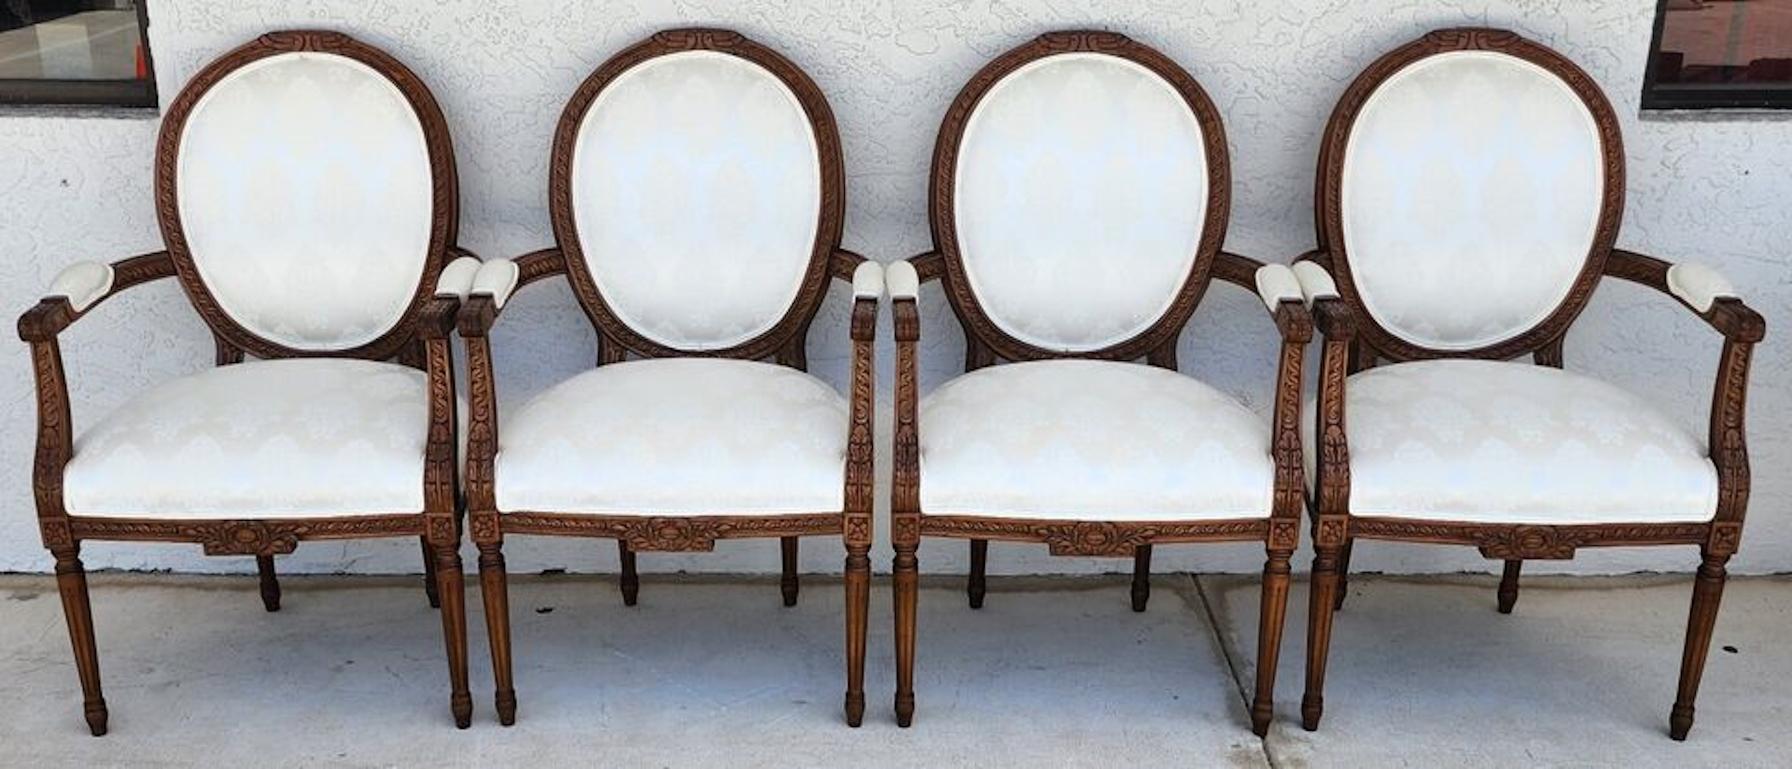 For FULL item description click on CONTINUE READING at the bottom of this page.

Offering One Of Our Recent Palm Beach Estate Fine Furniture Acquisitions Of A
Set of 4 French Louis XVI Style Dining Armchairs
Upholstered in 100% Damask Satin Cotton